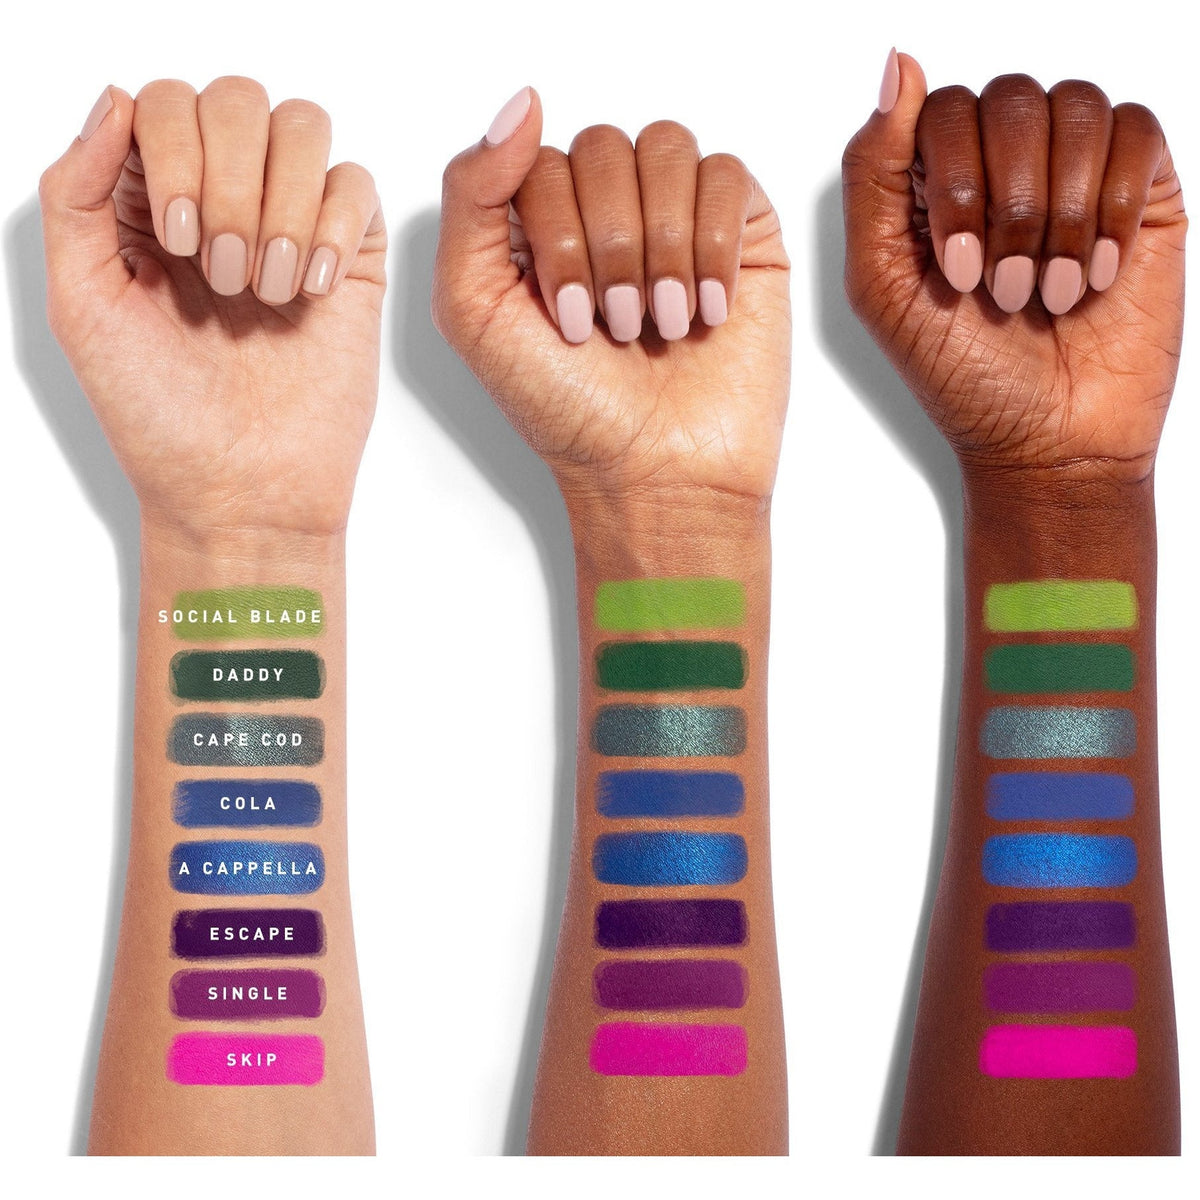 James_Charles_Palette_Arm_Swatches_PDP_ROW5